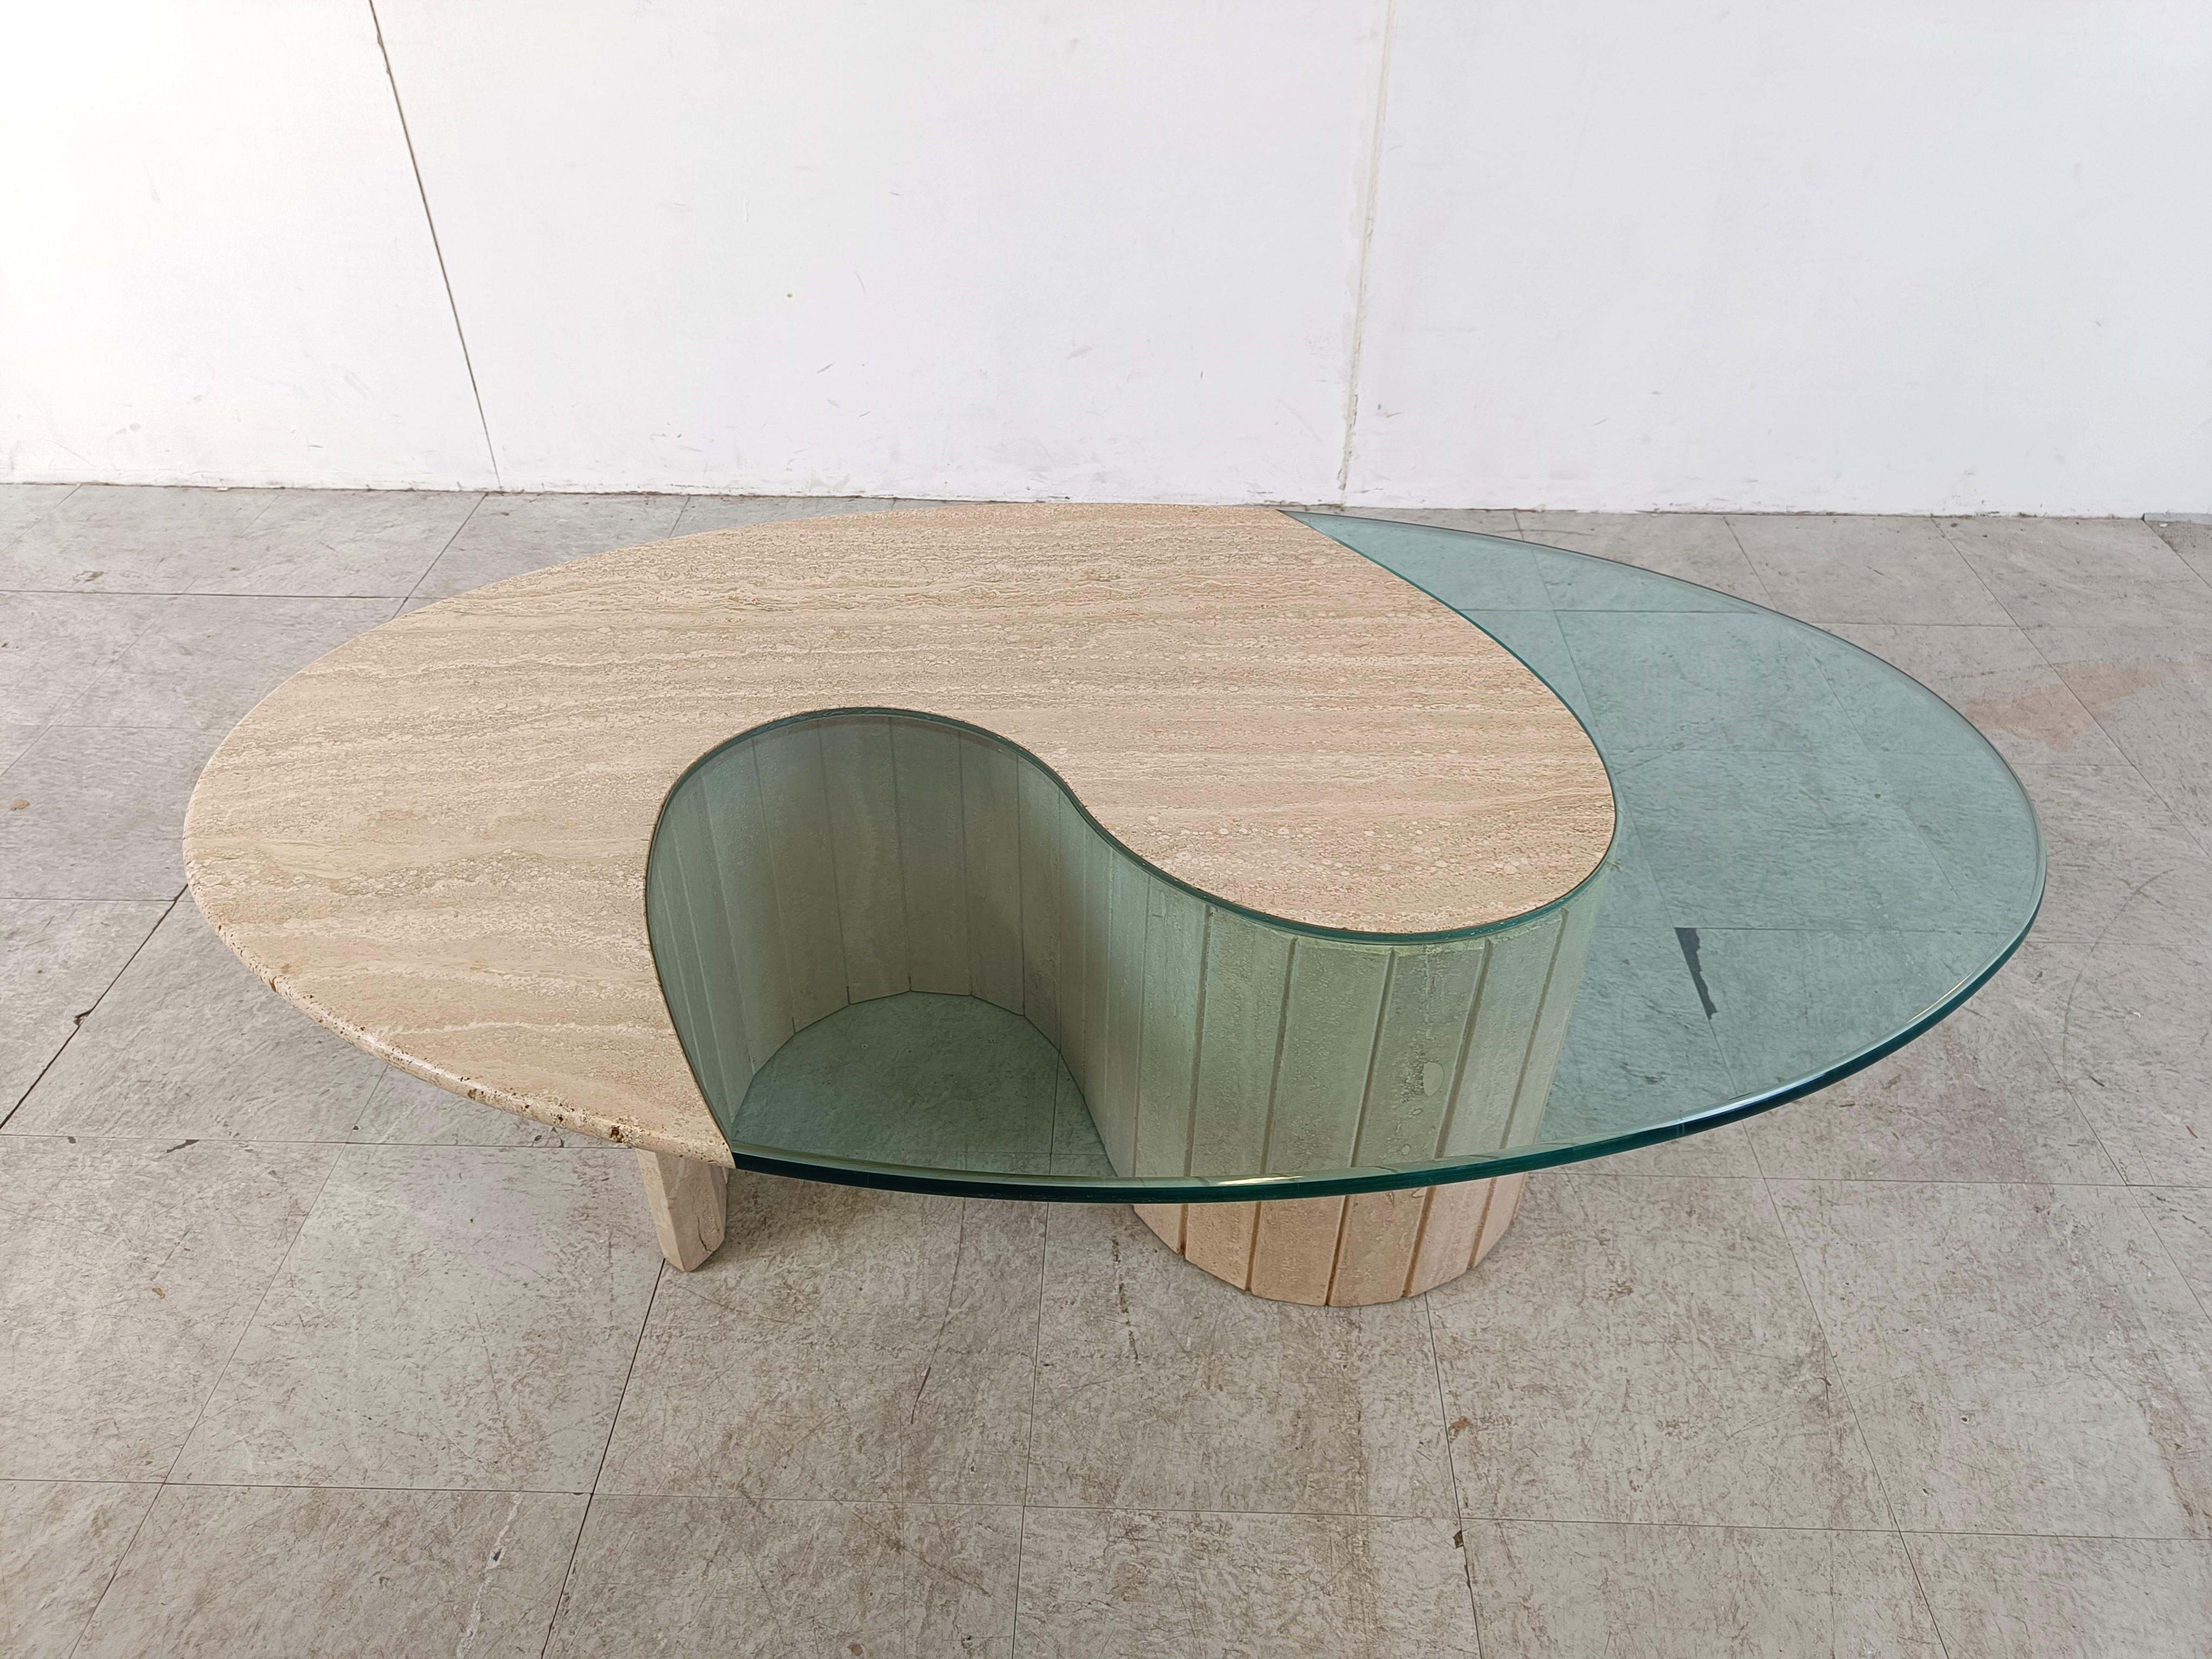 Unique oval travertine and glass coffee table.

The table top consists of a ying & yang shaped top with integrated glass mounted on a reeded travertine base

1970s - Italy

Height: 40cm/15.74